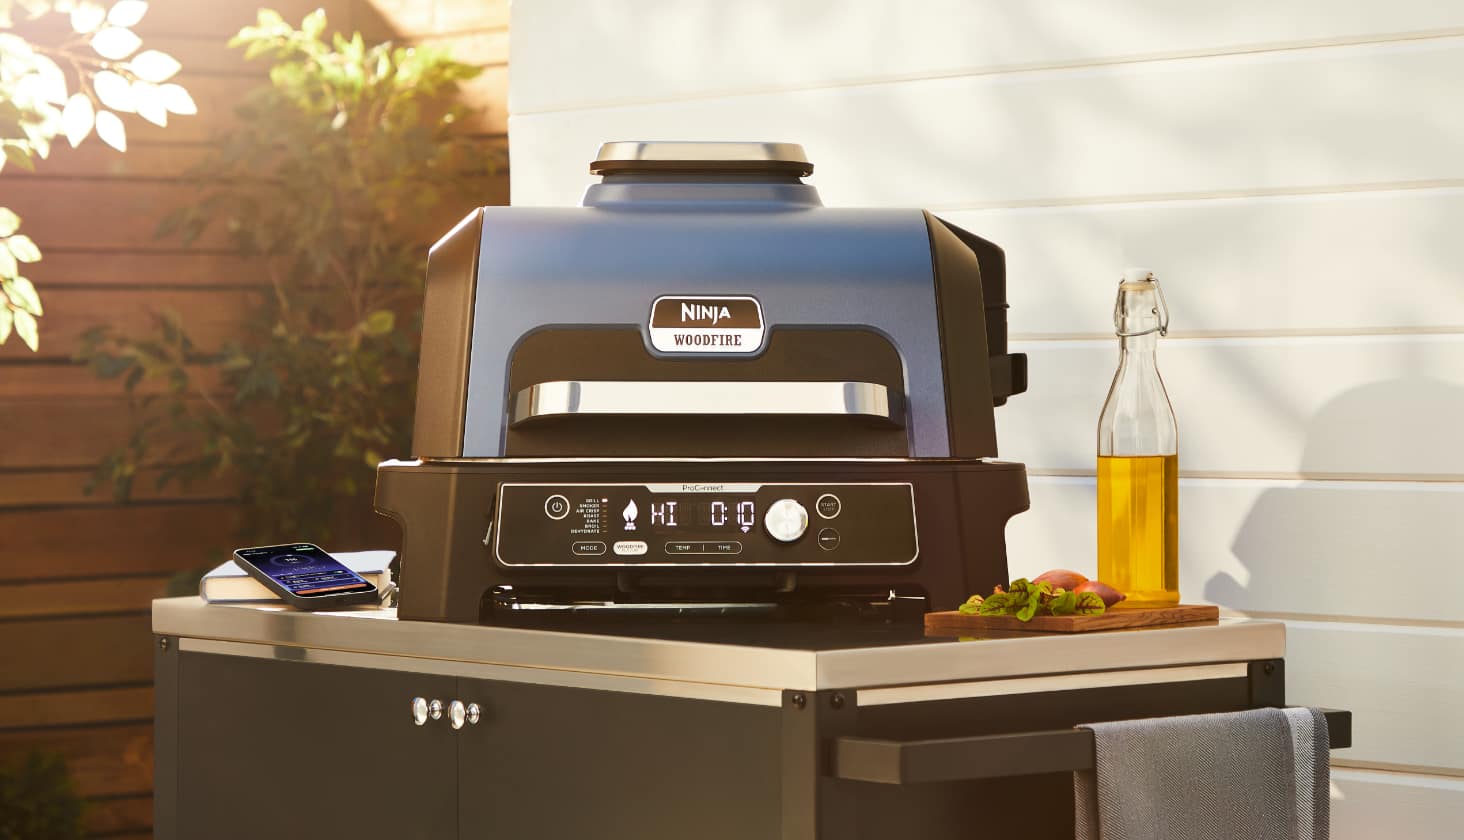 A Ninja Woodfire Pro Connect Grill & Smoker on a patio.